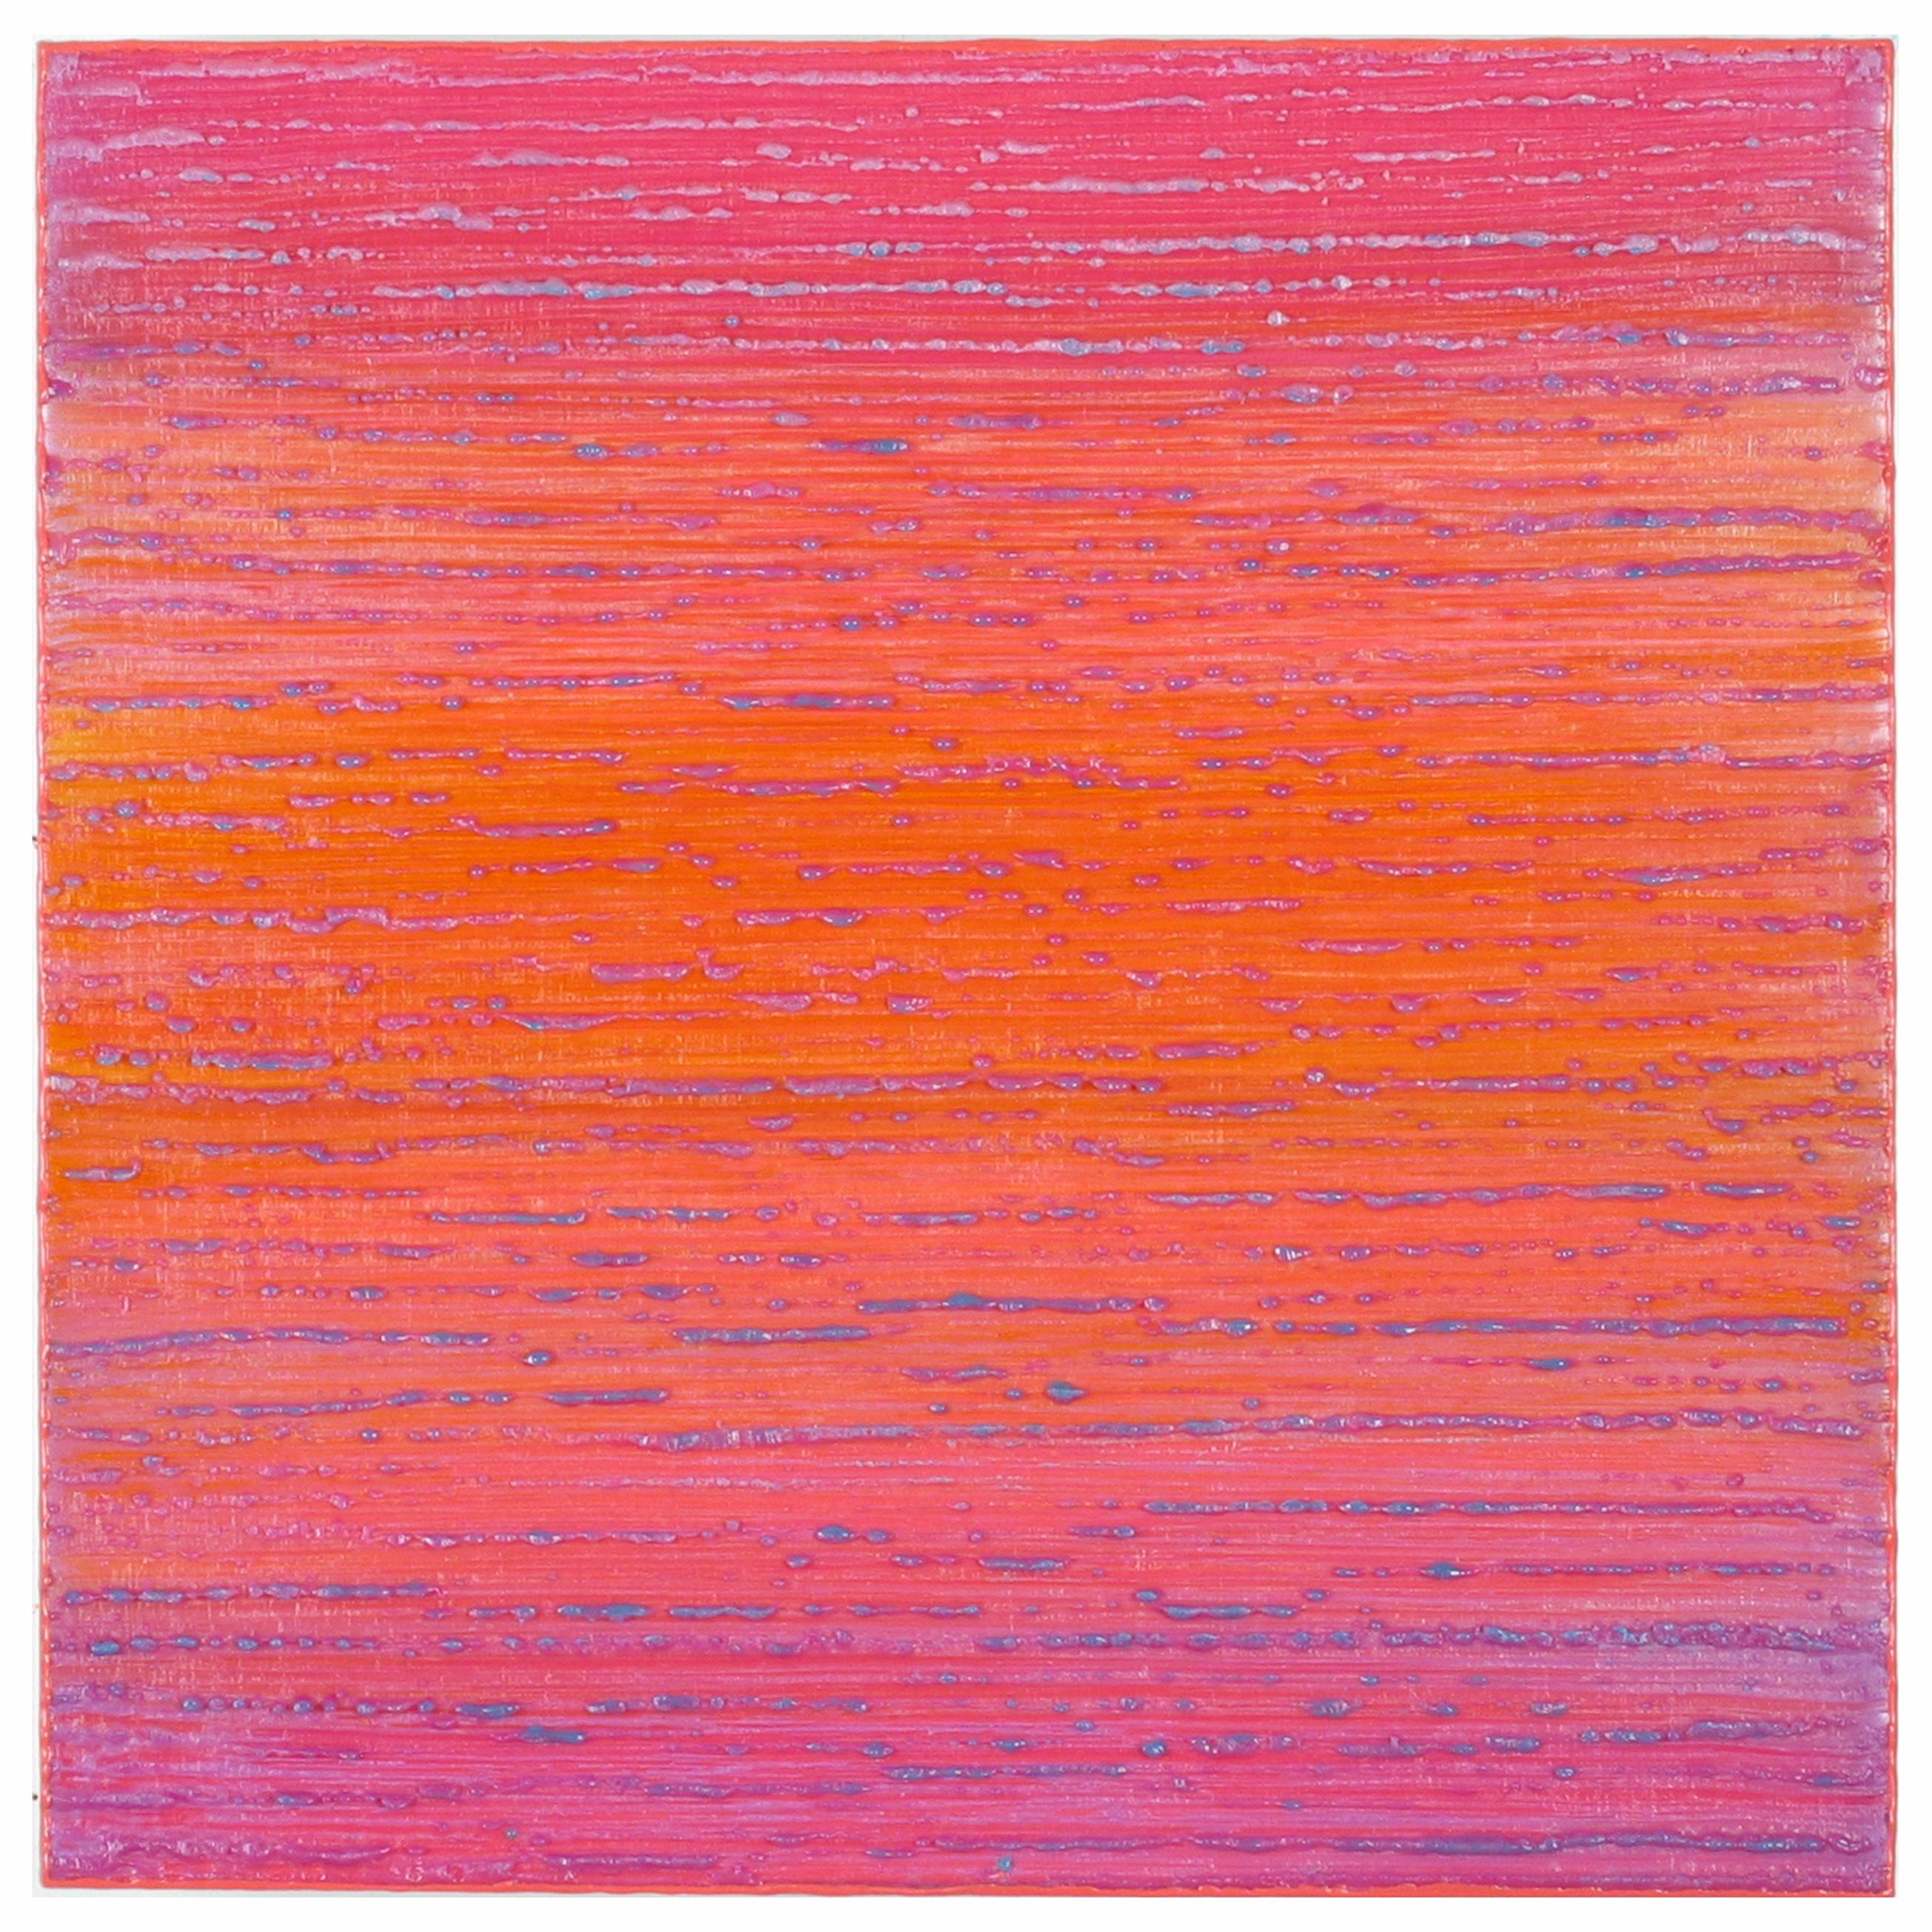 Silk Road 450, 2019, encaustic on panel, 12 x 12 x 2 inches For Sale 8